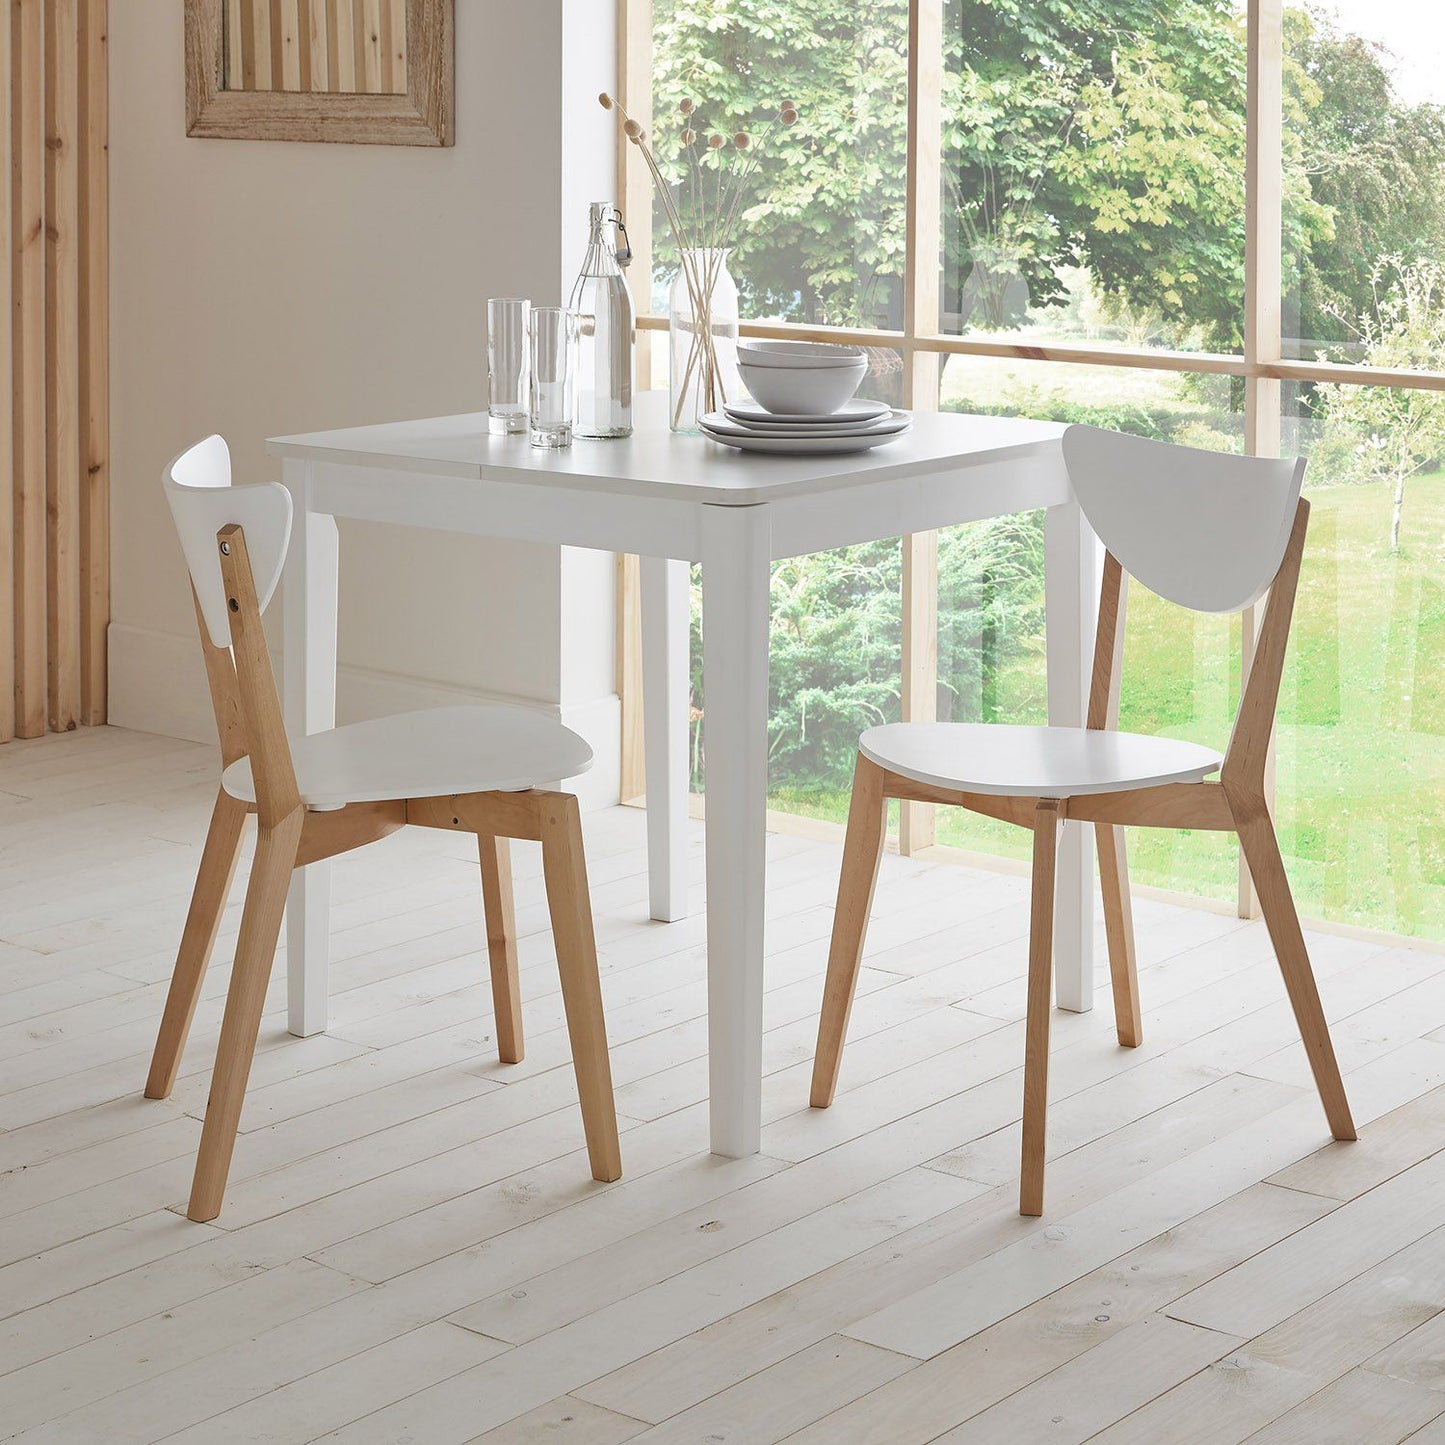 Paul stackable chairs x2 - white - Laura James